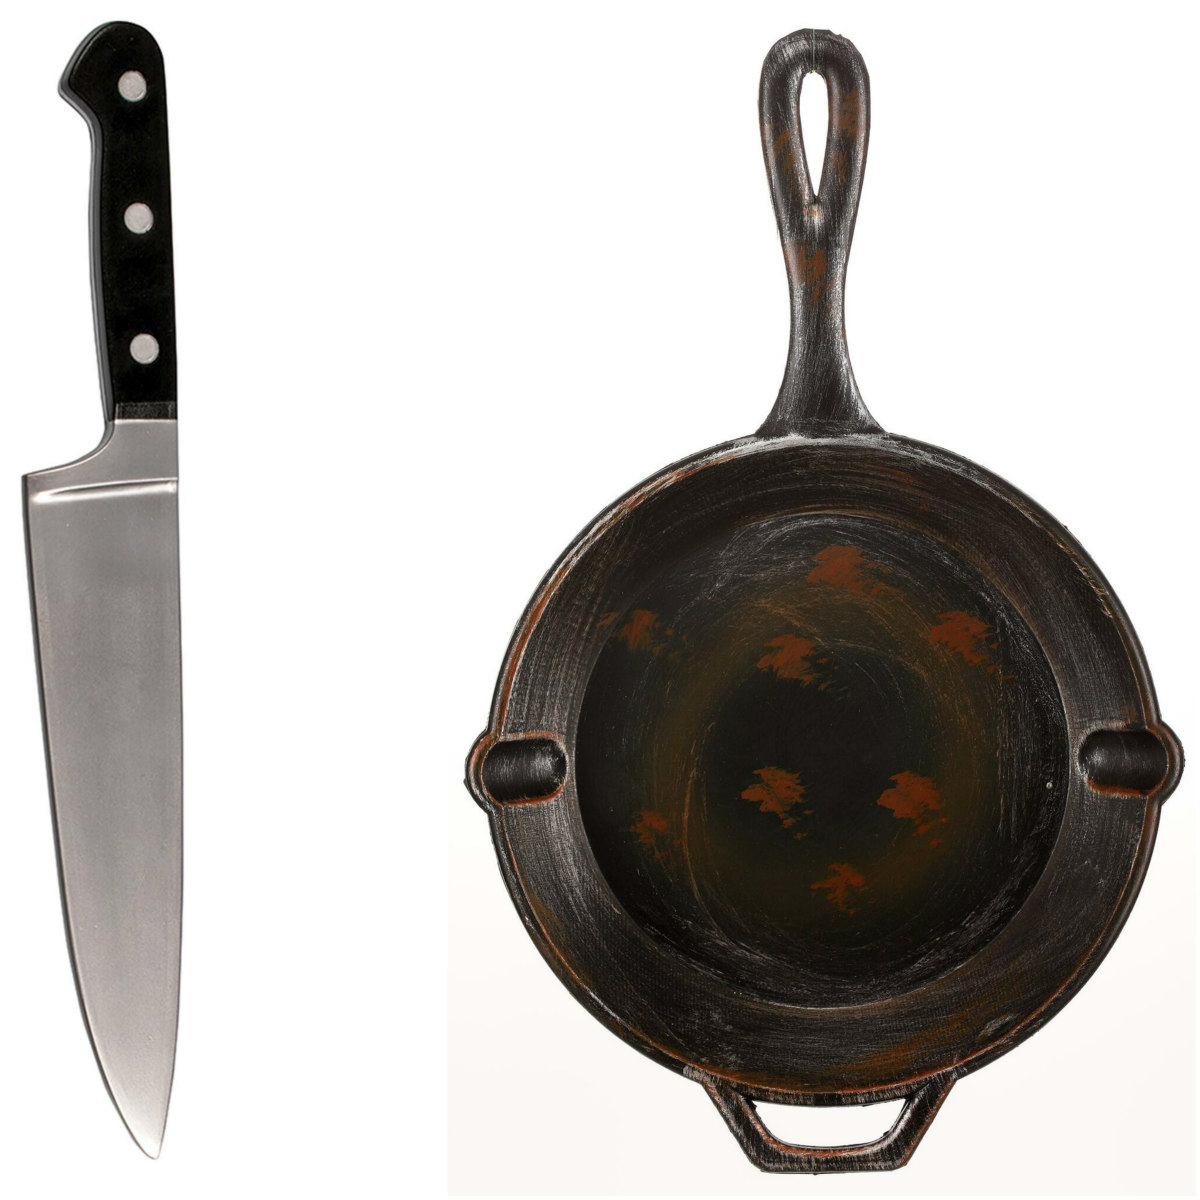 The Bear Chef Accessories